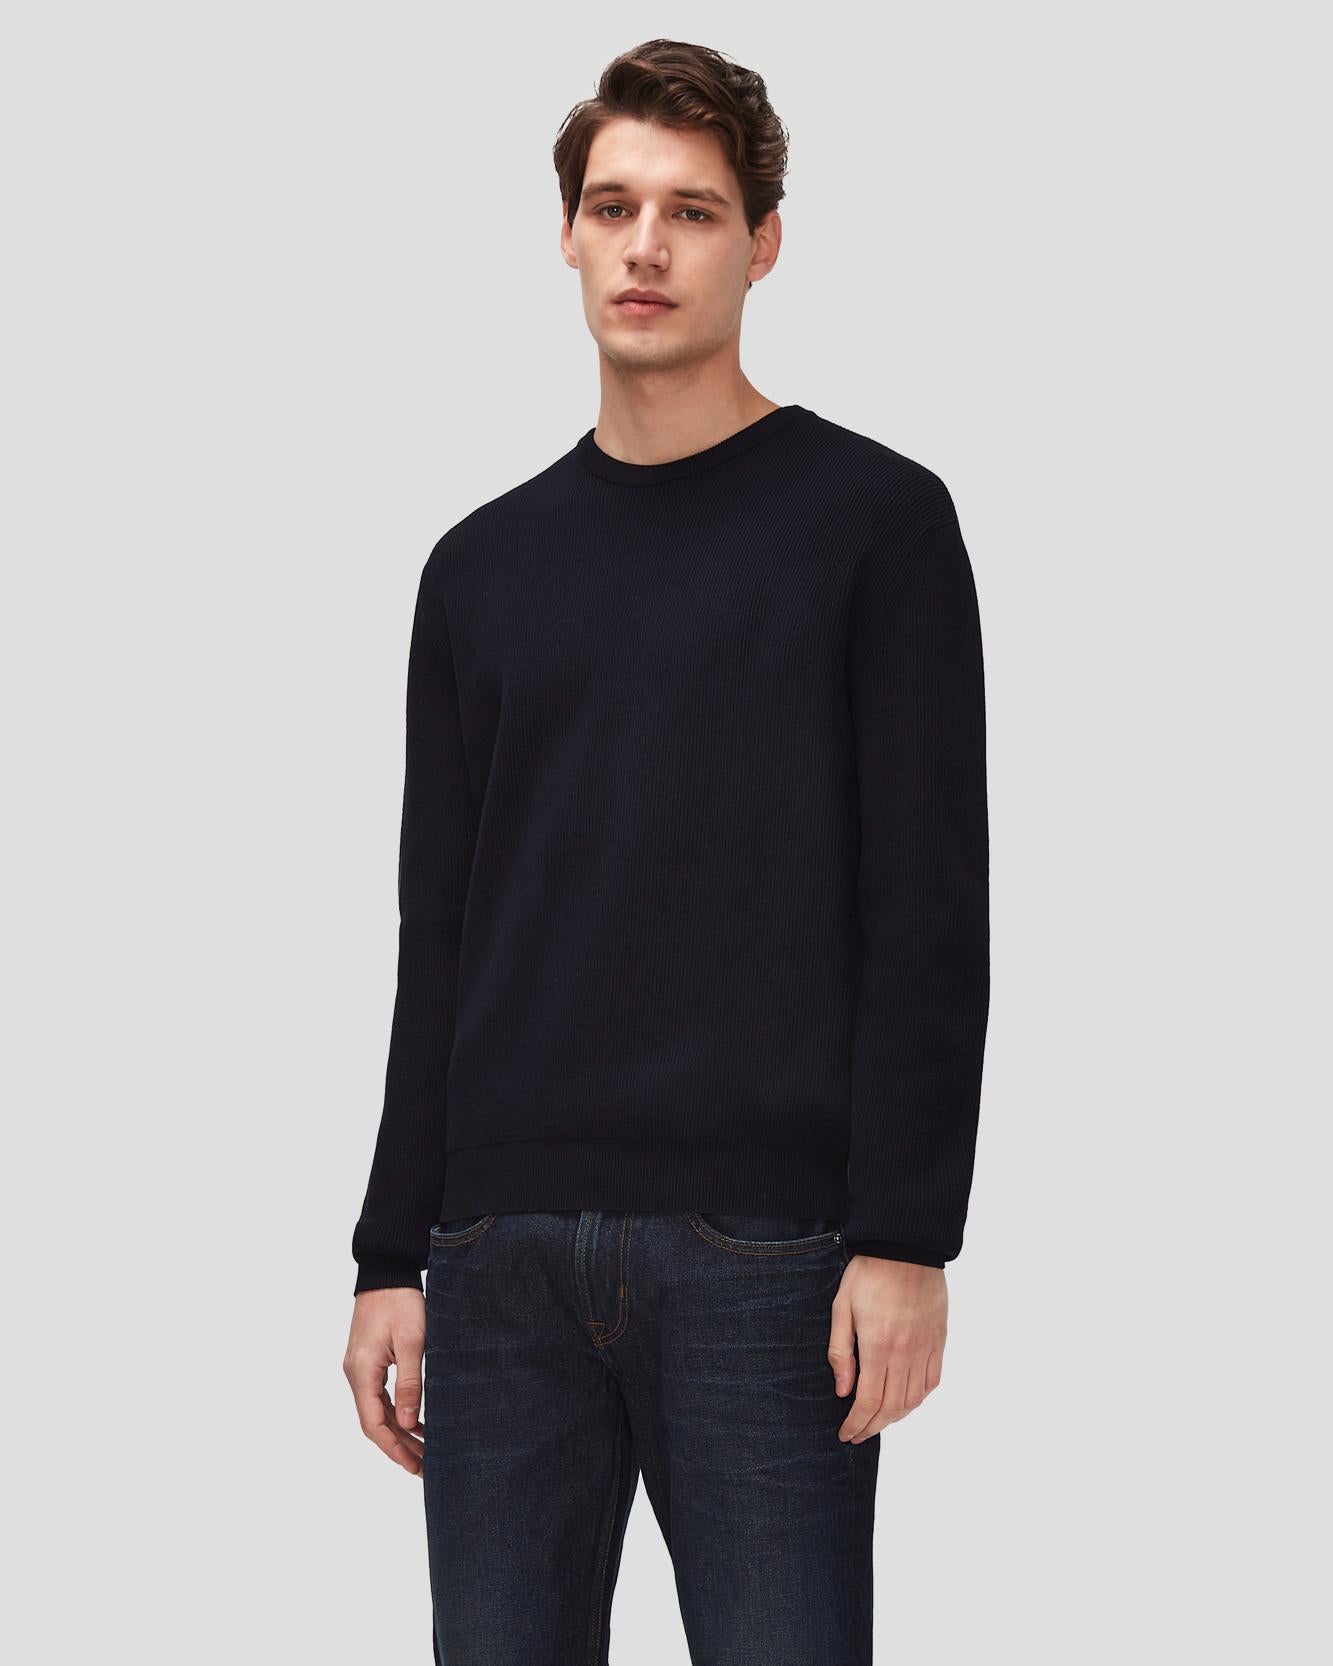 Luxe Performance Plus Sweater in Navy | 7 For All Mankind